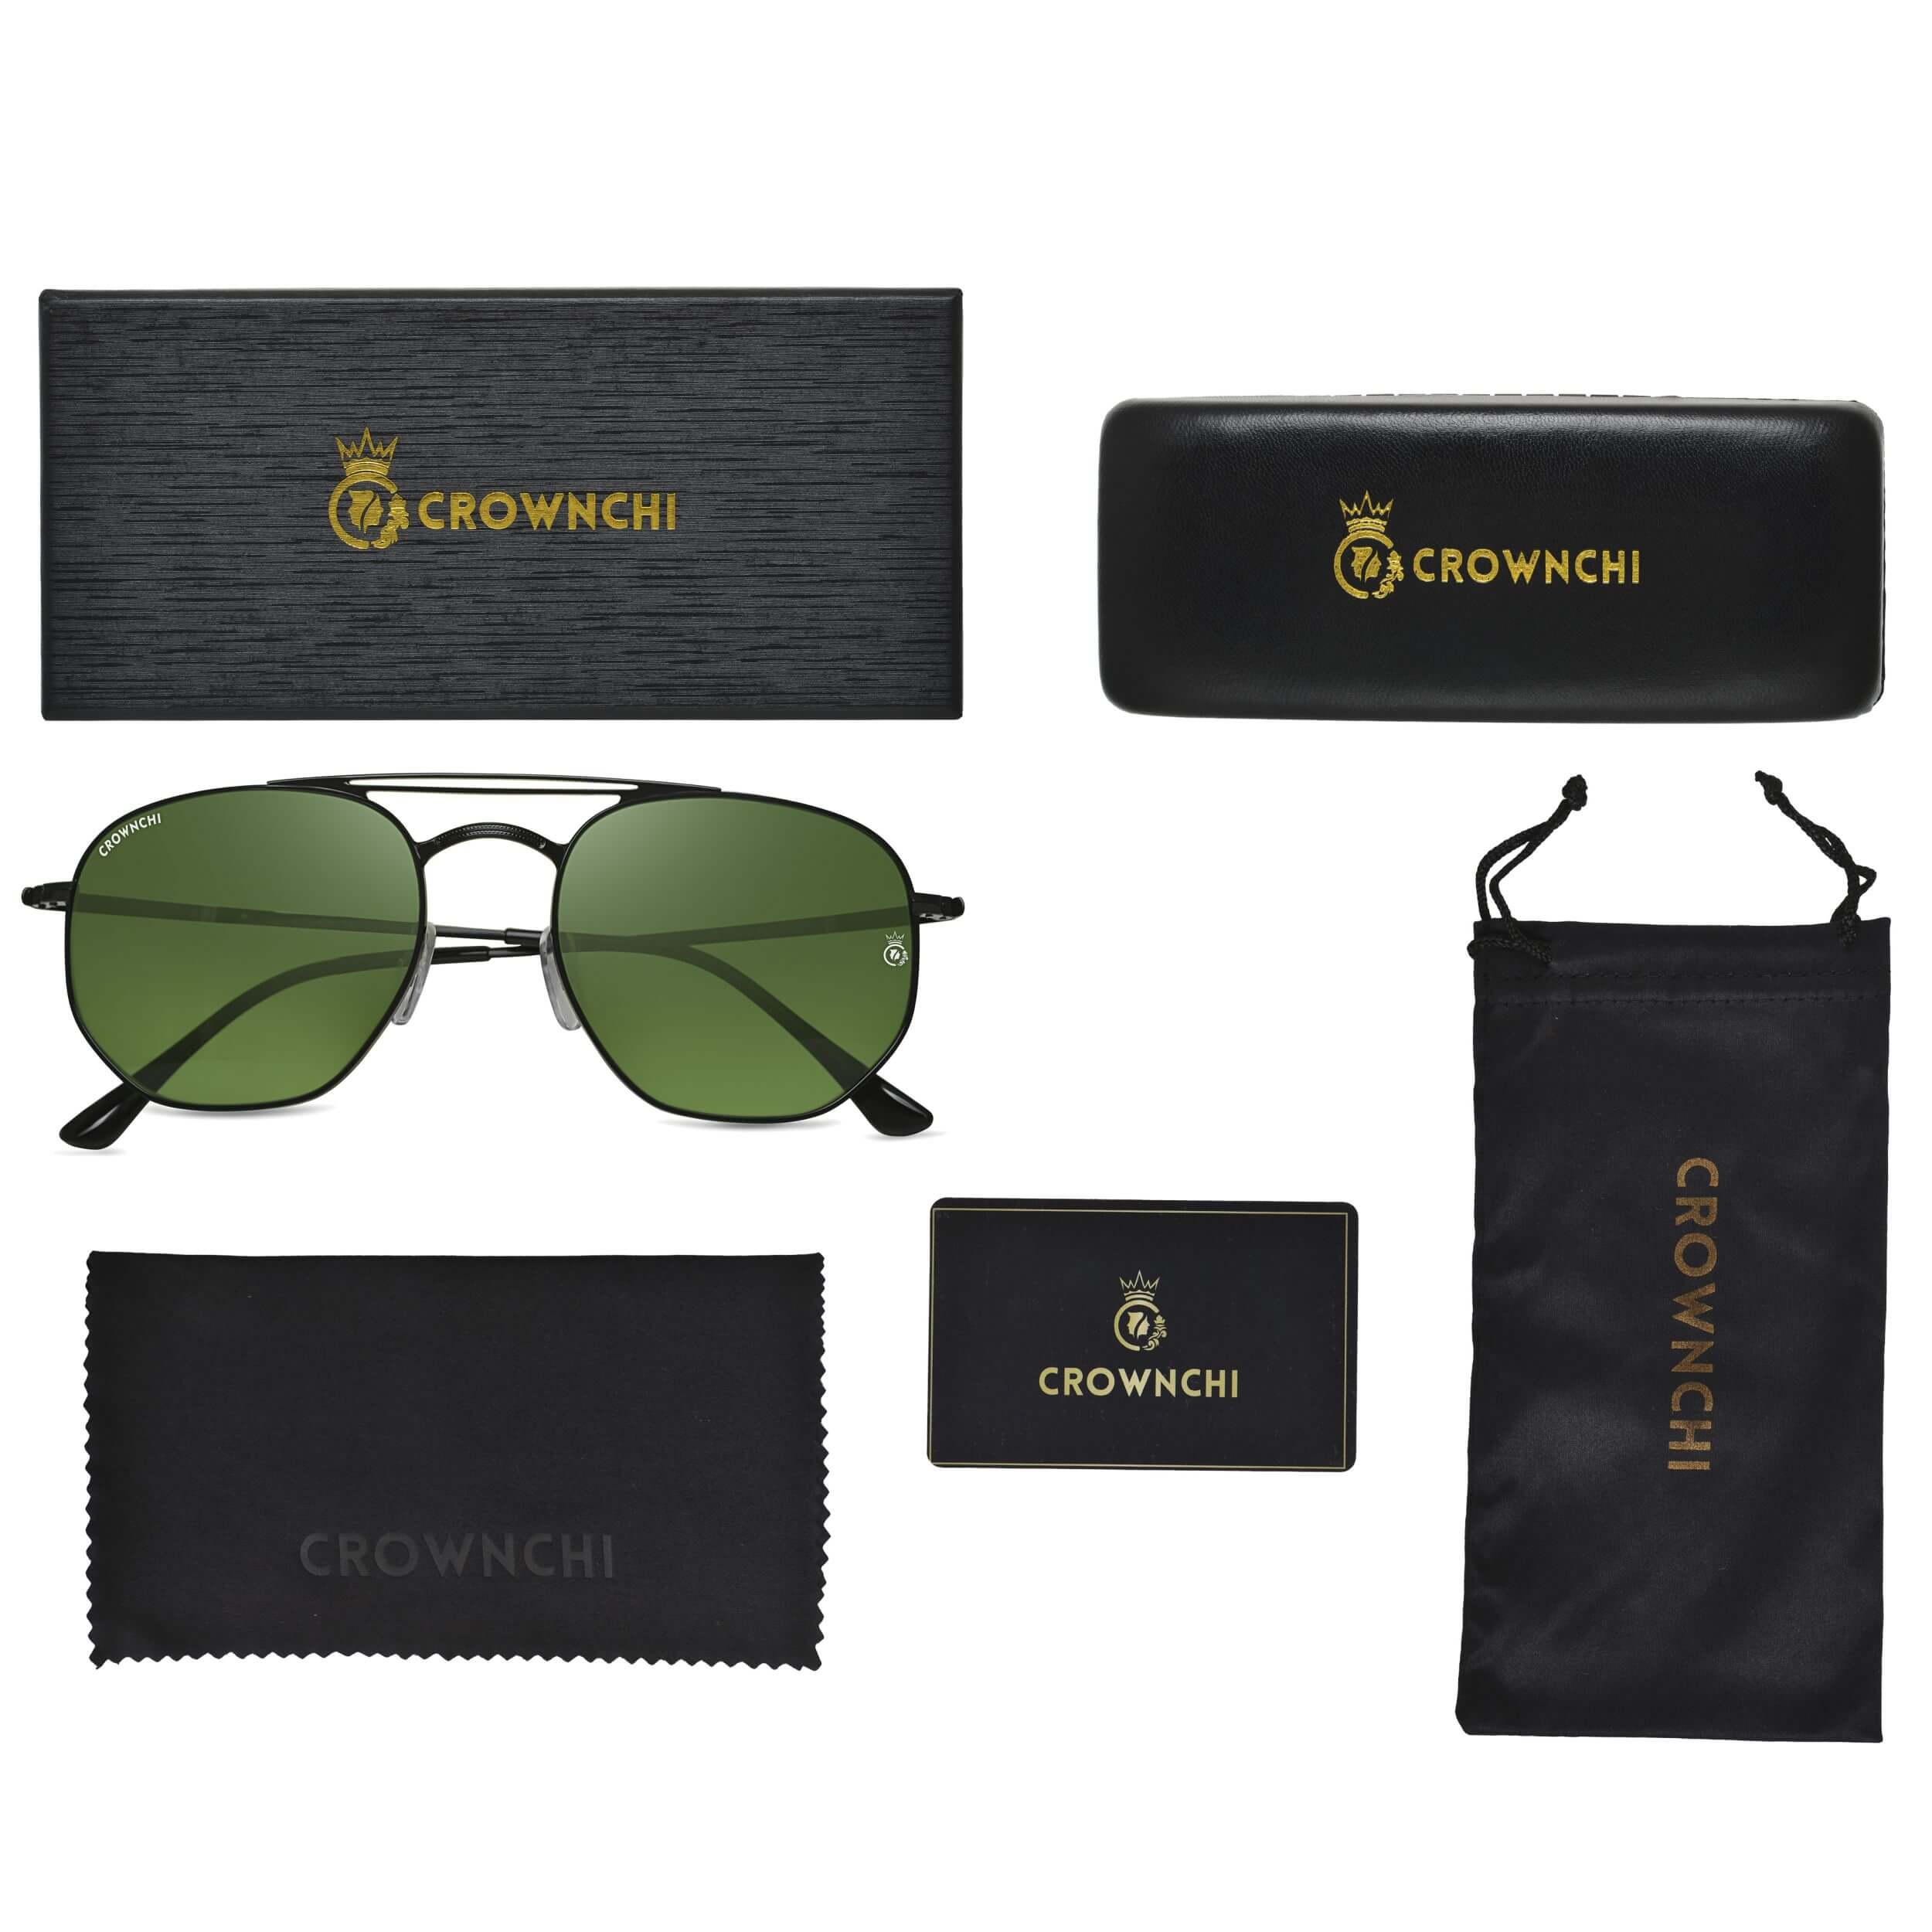 Moscow Black Green Round Edition Sunglasses